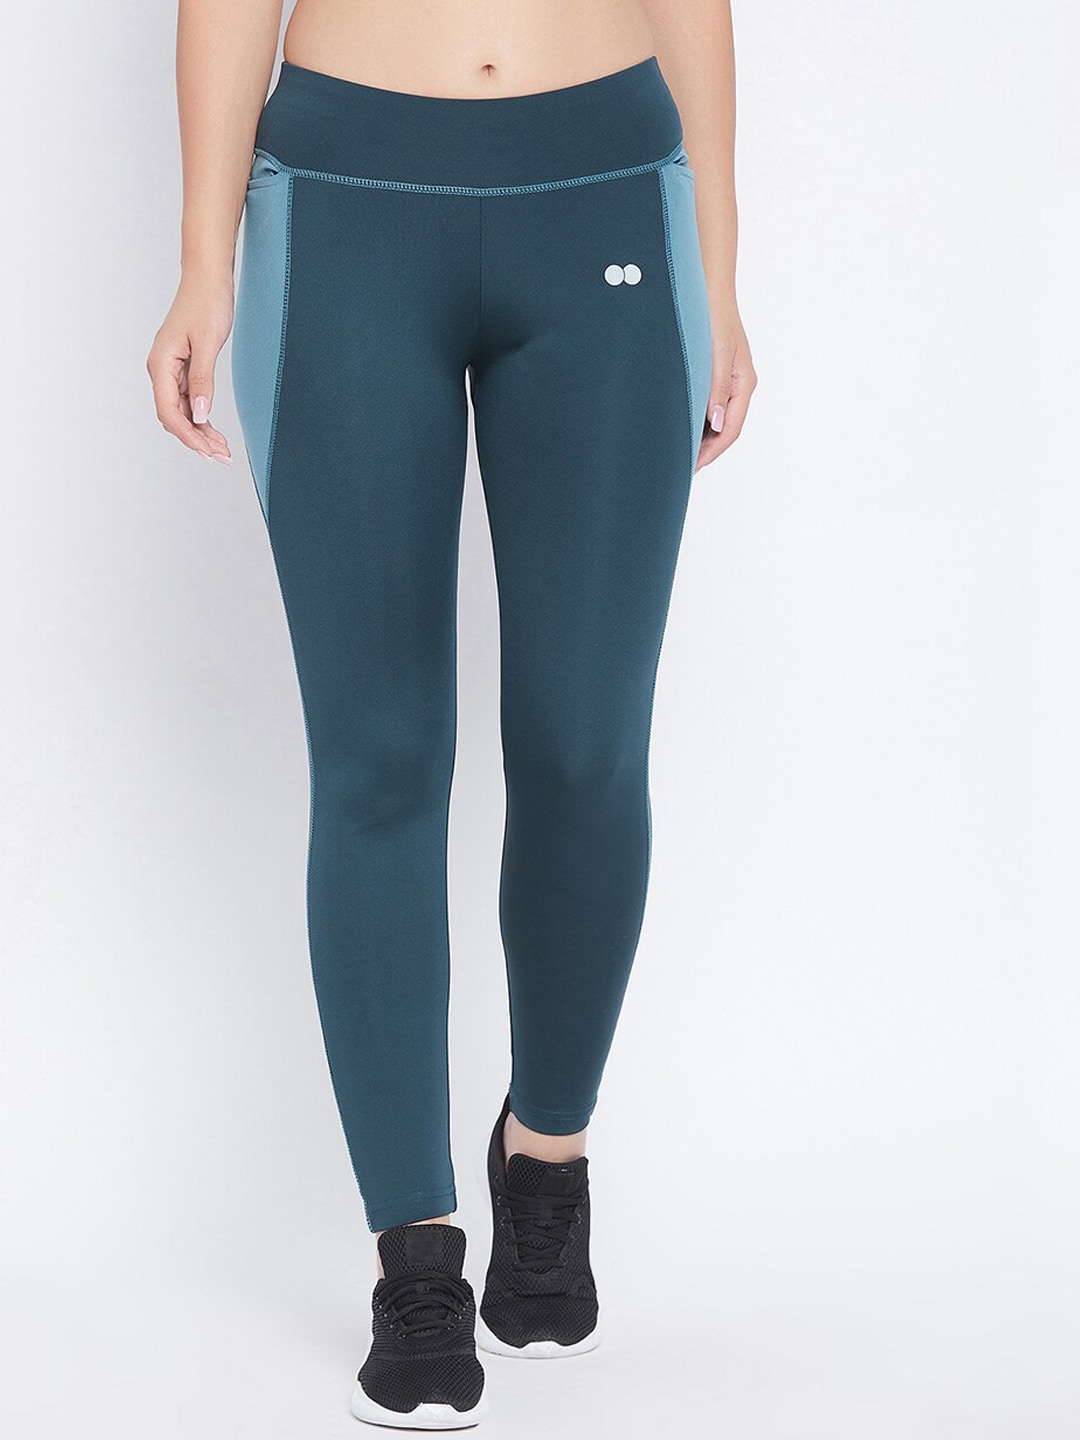 Clovia Women Teal Blue Colorblocked Snug-Fit Ankle-Length Tights Price in India